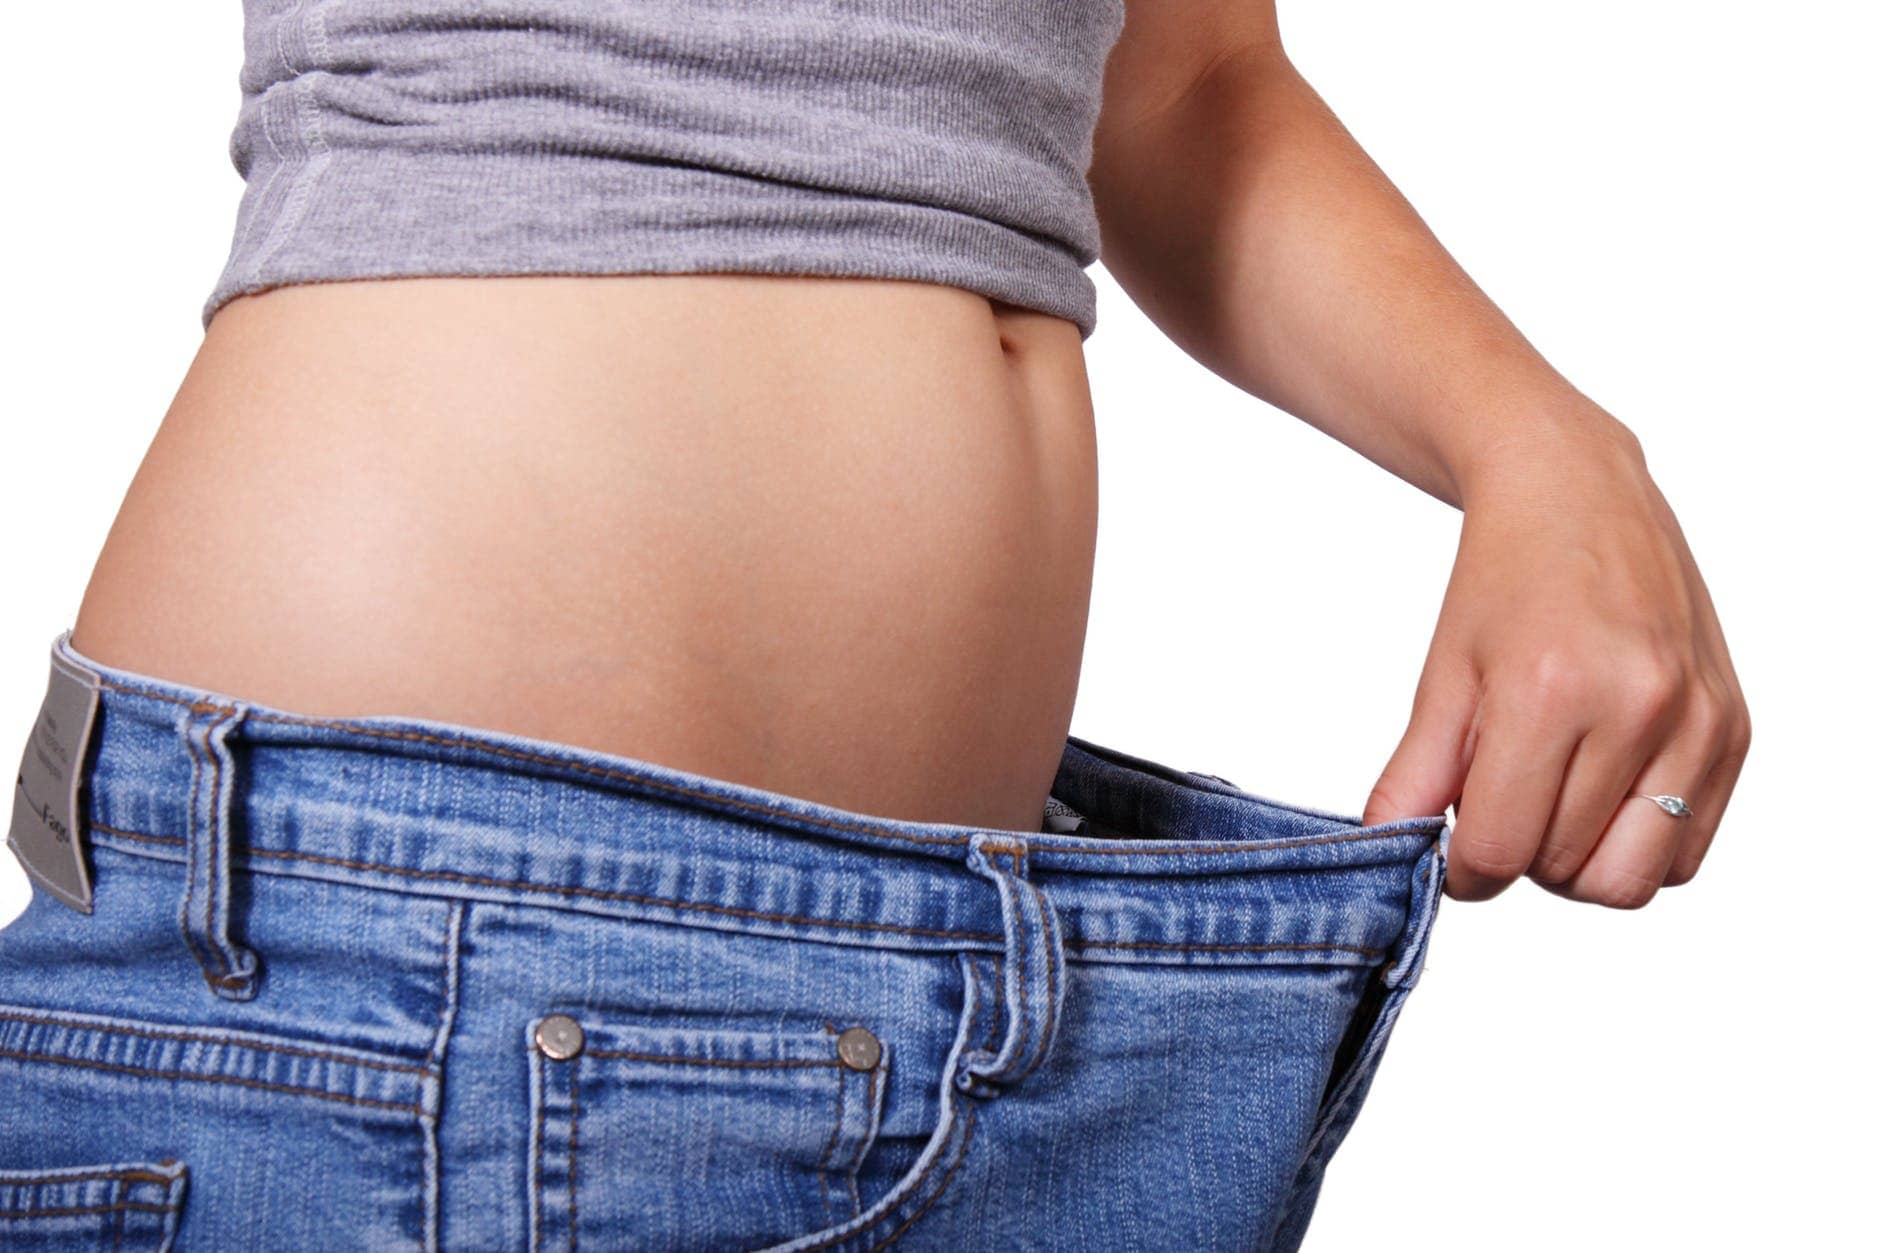 How to Get Rid of a Bloated Belly